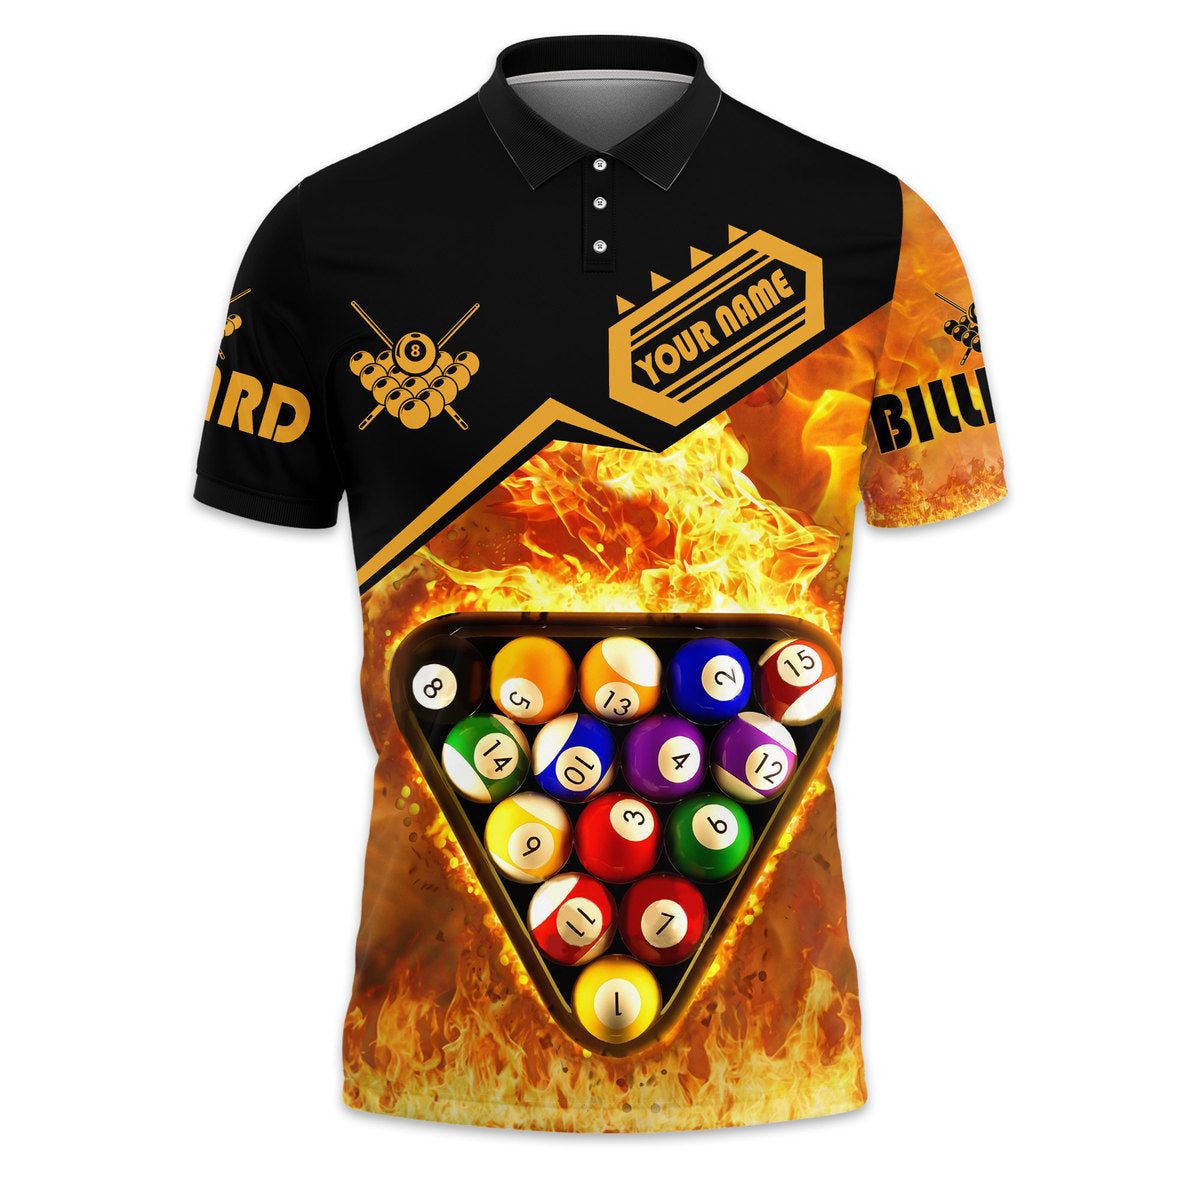 Personalized Cue Ball Fire Polo Shirt/ Perfect Shirt for Billiards Player/ Team